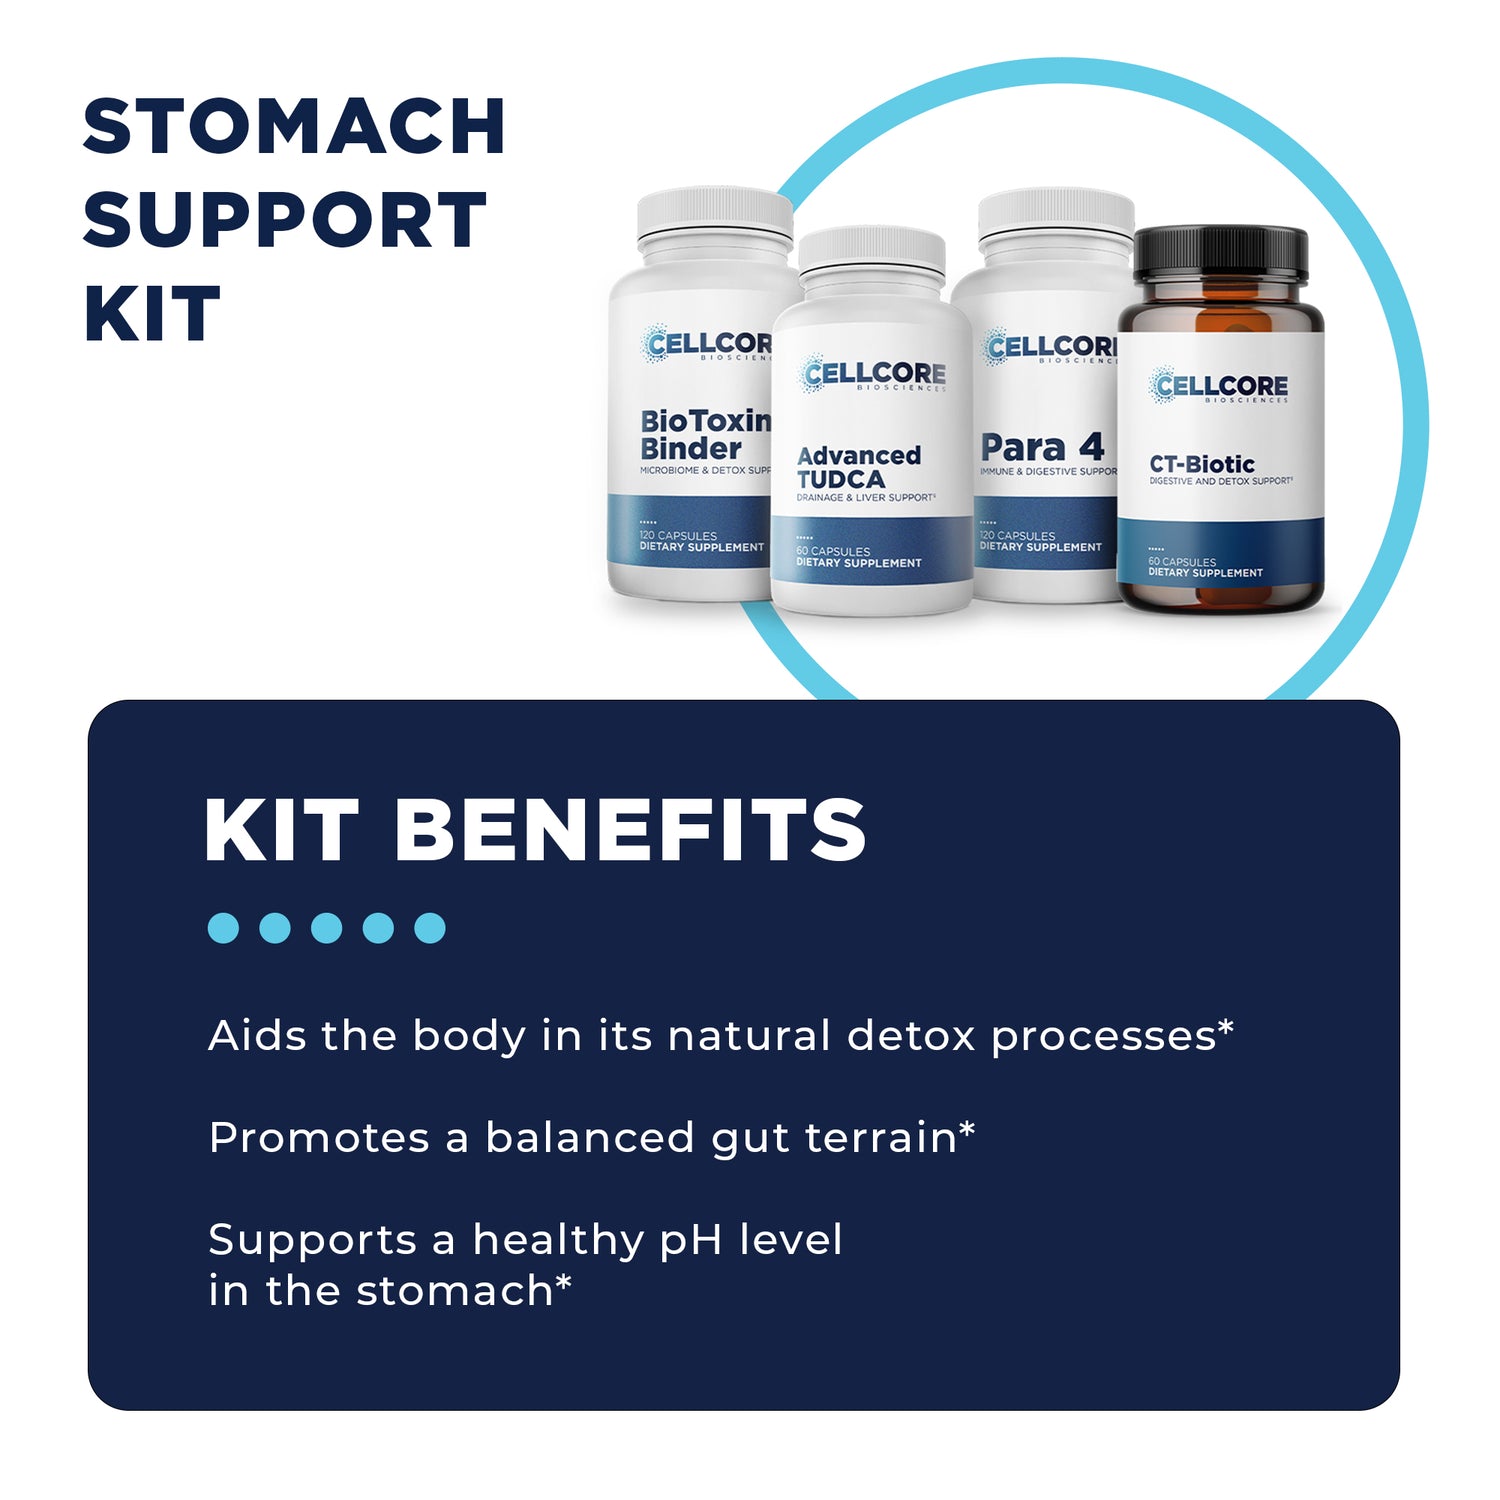 Stomach Support Kit Benefits